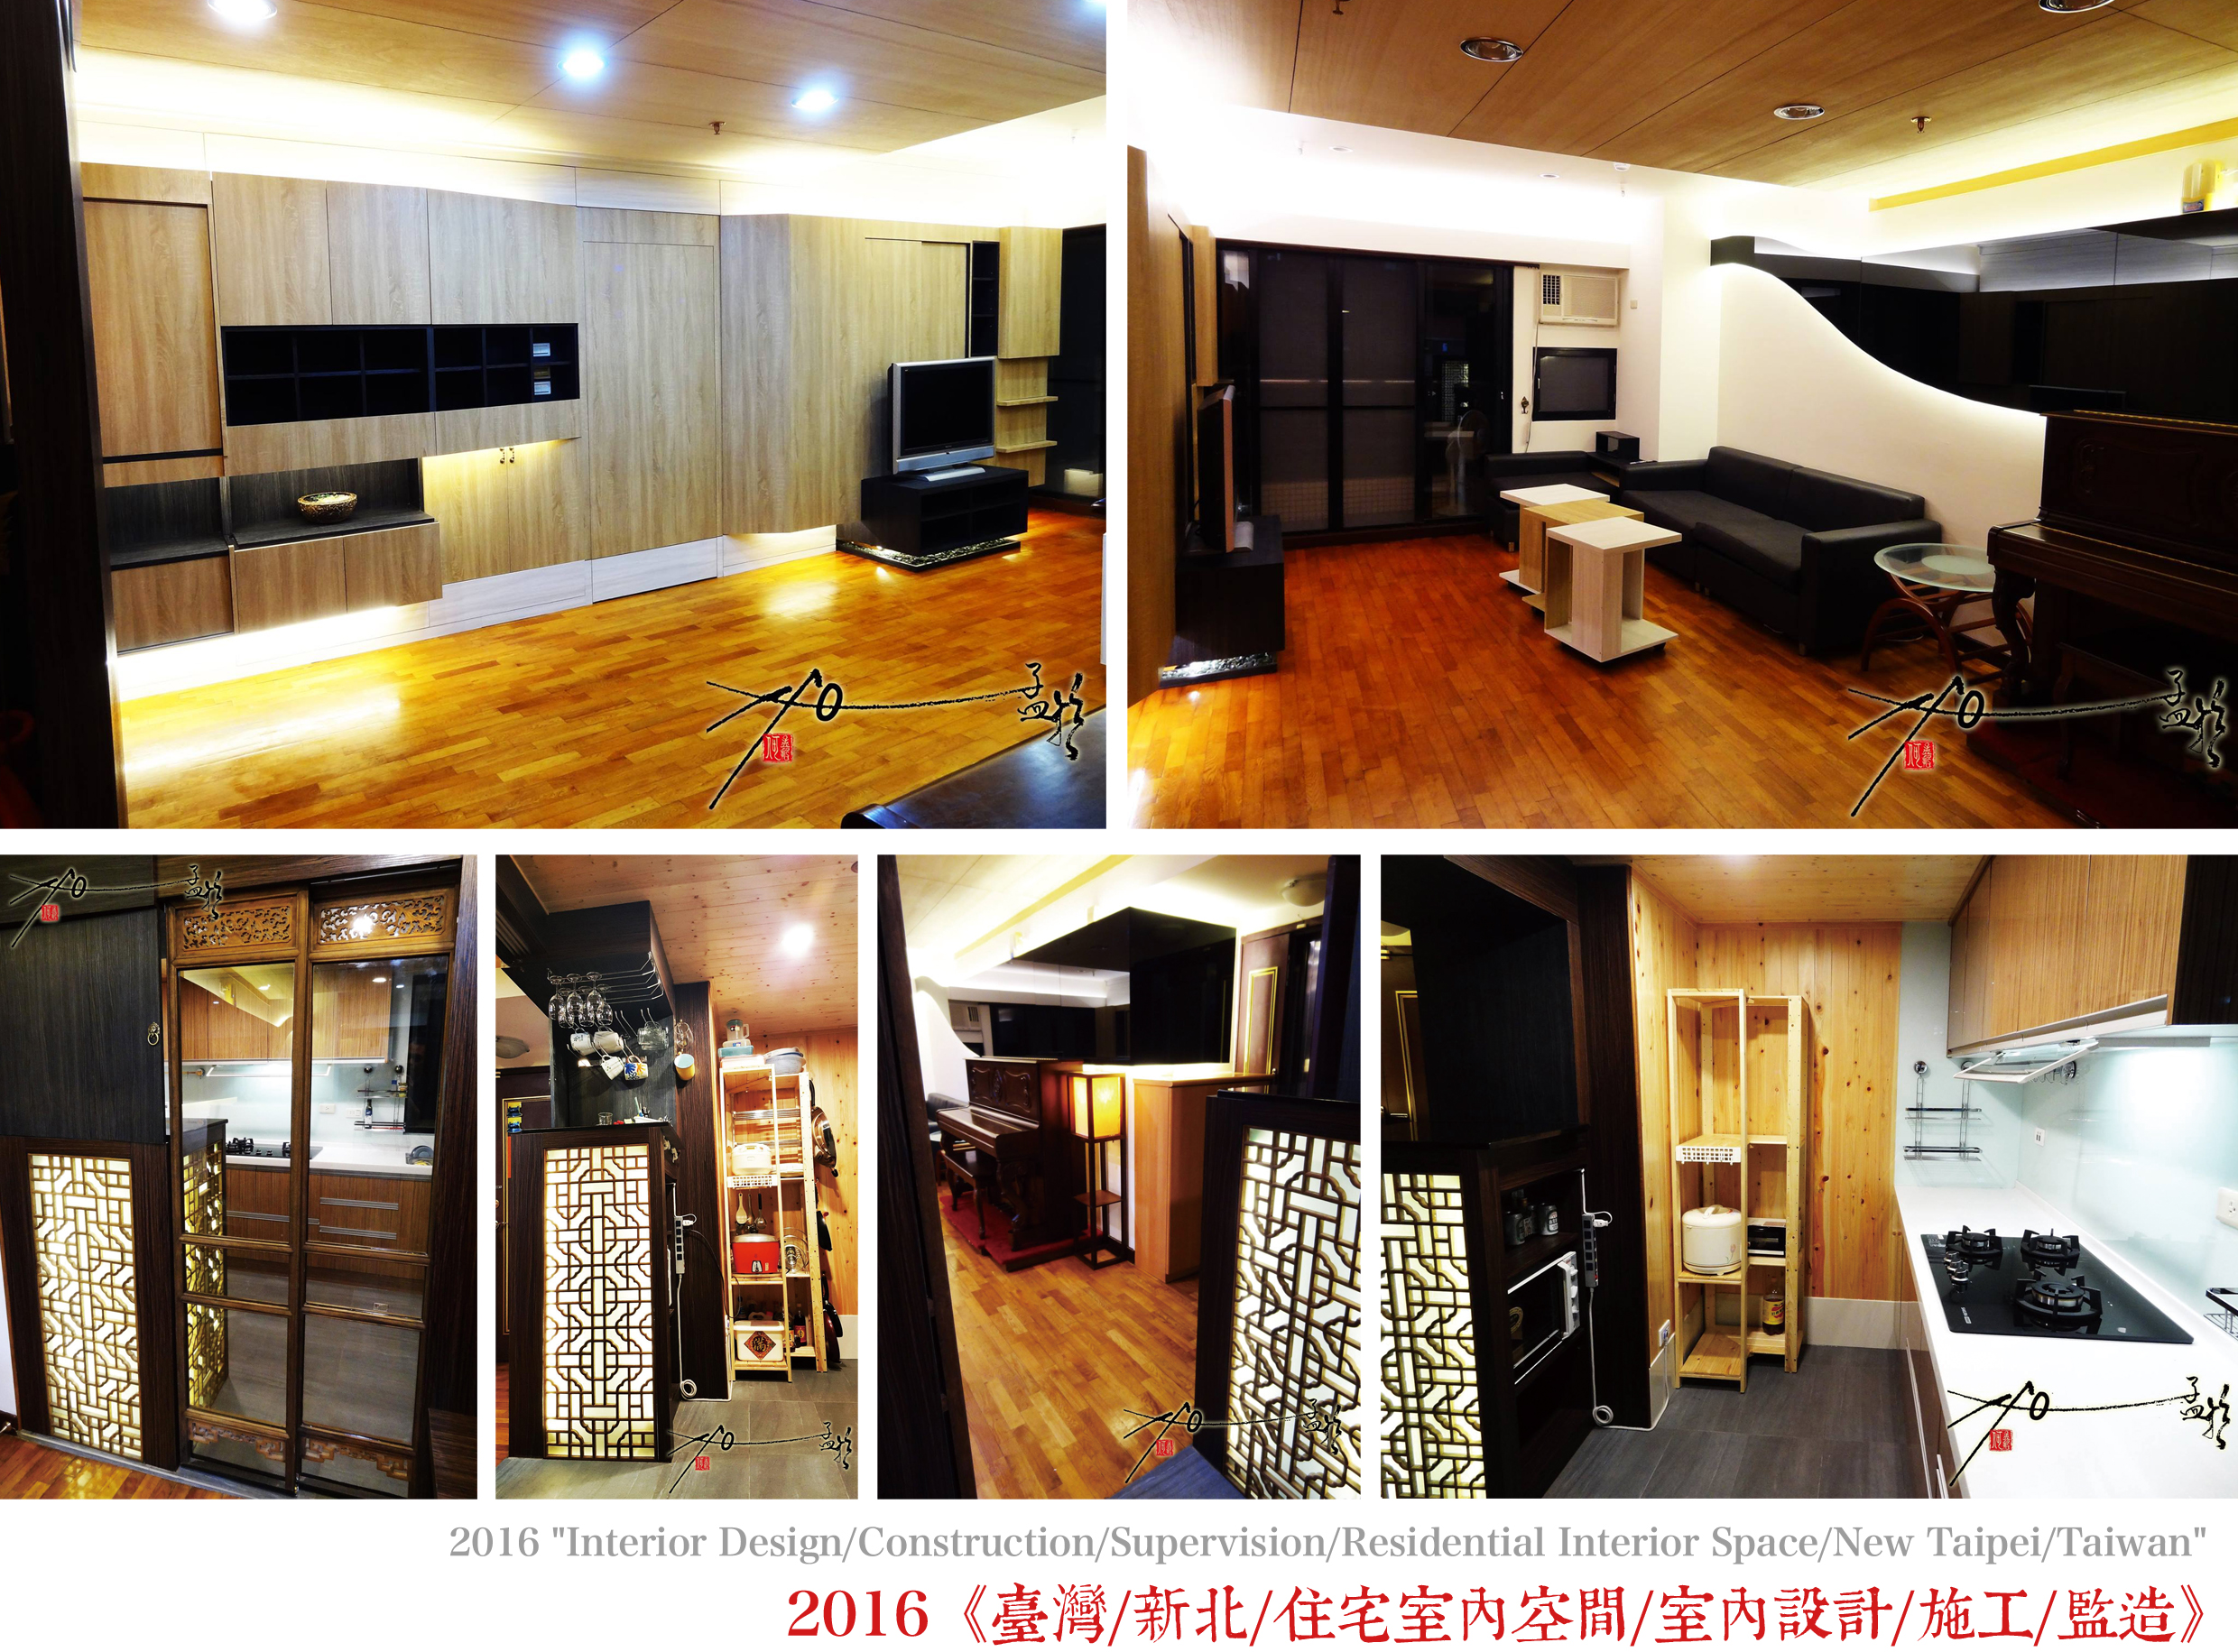 2016 "Interior Design/Construction/Supervision/Residential Interior Space/New Taipei/Taiwan"2016《臺灣/新北/住宅室內空間/室內設計/施工/監造》【Just Jump Culture all rights reserved子丑文創/版權所有】